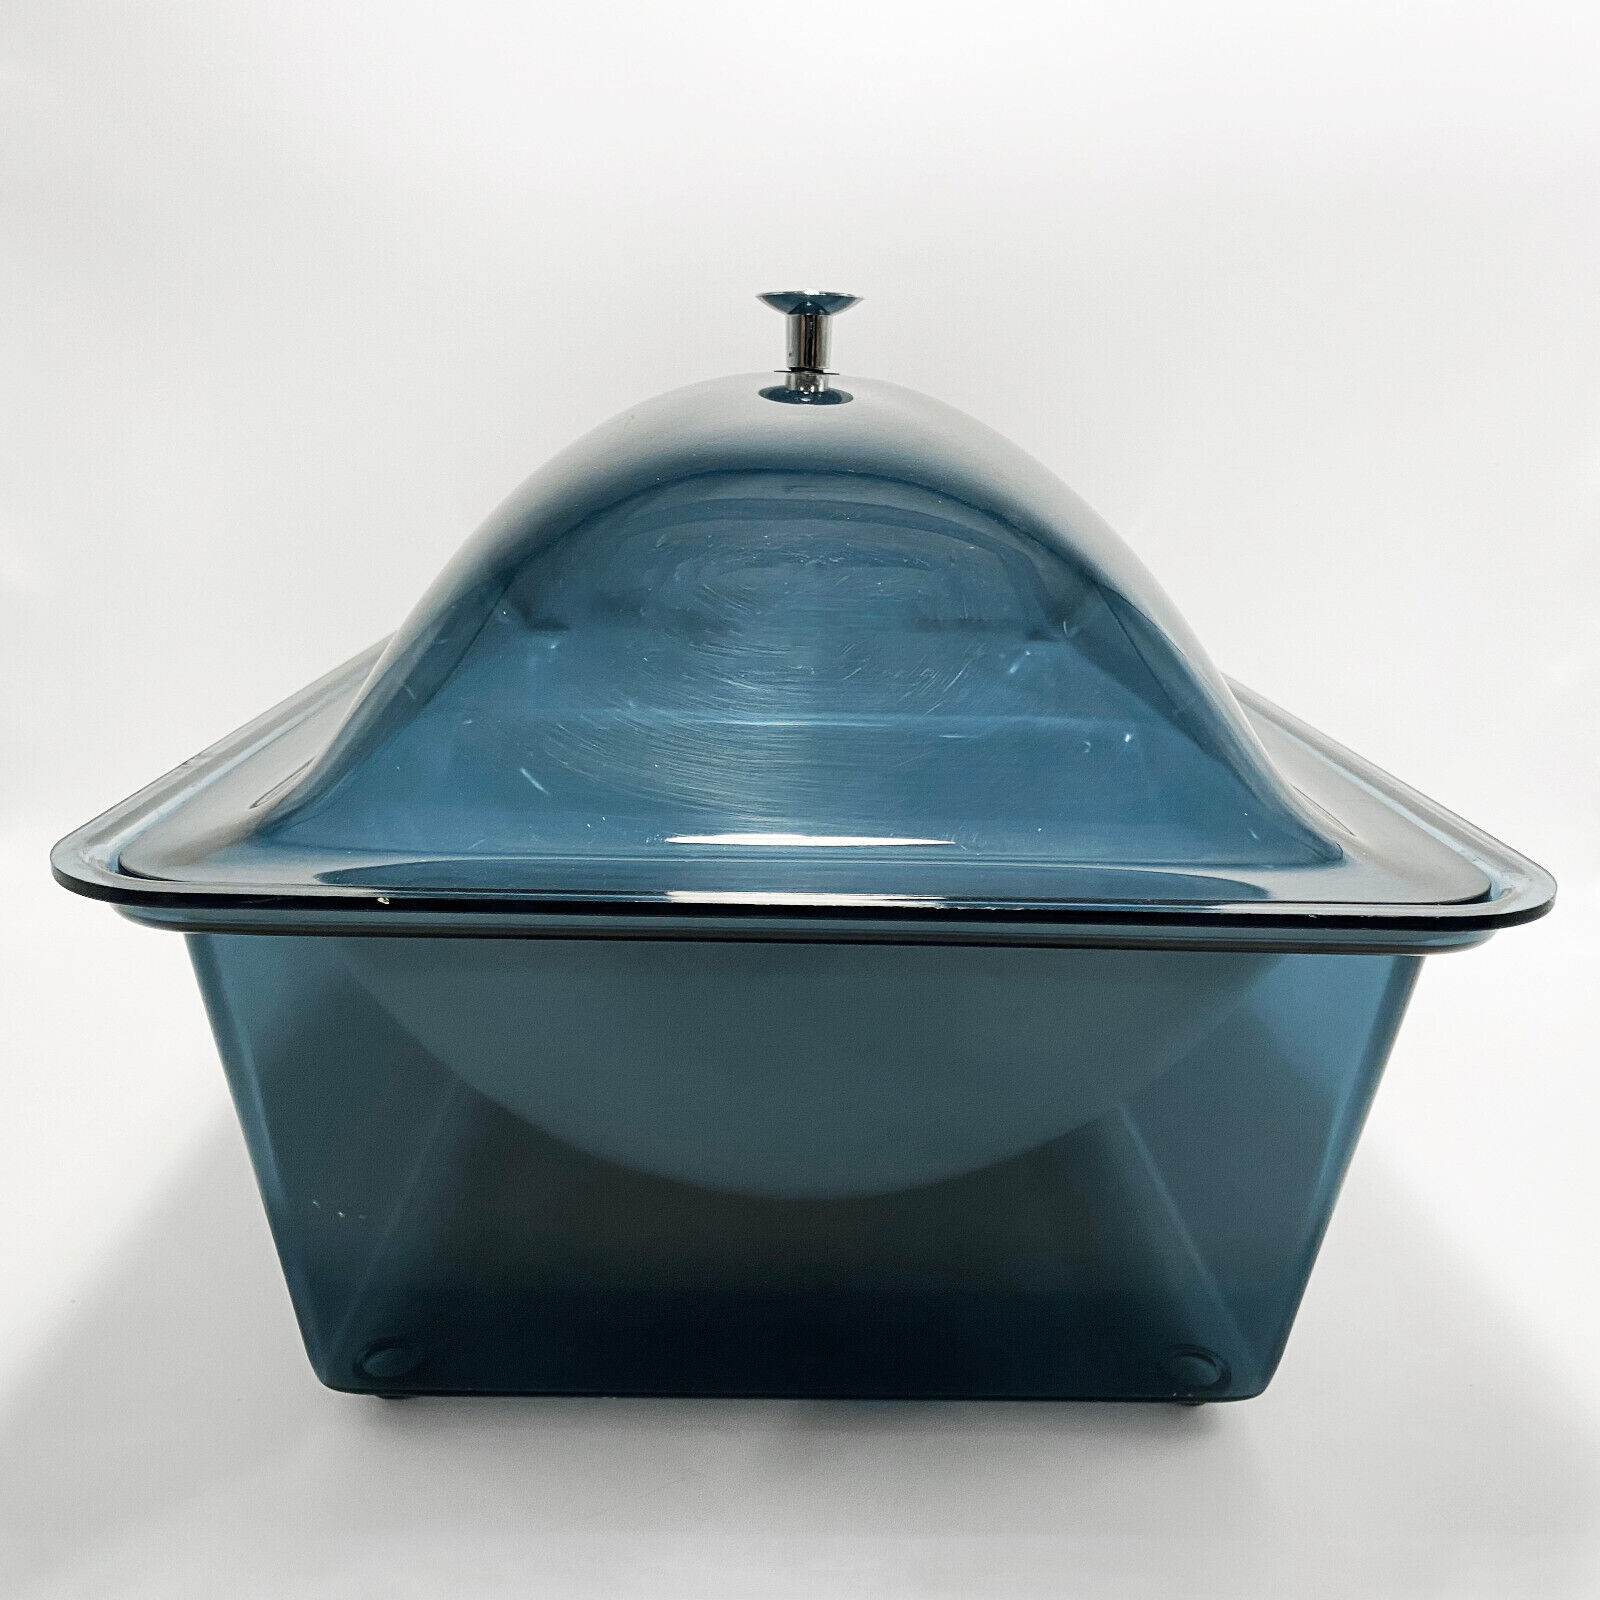 TASTY TEMP Vintage 60s 70s Domed Double Serving Container - Smoked Black (Blue)